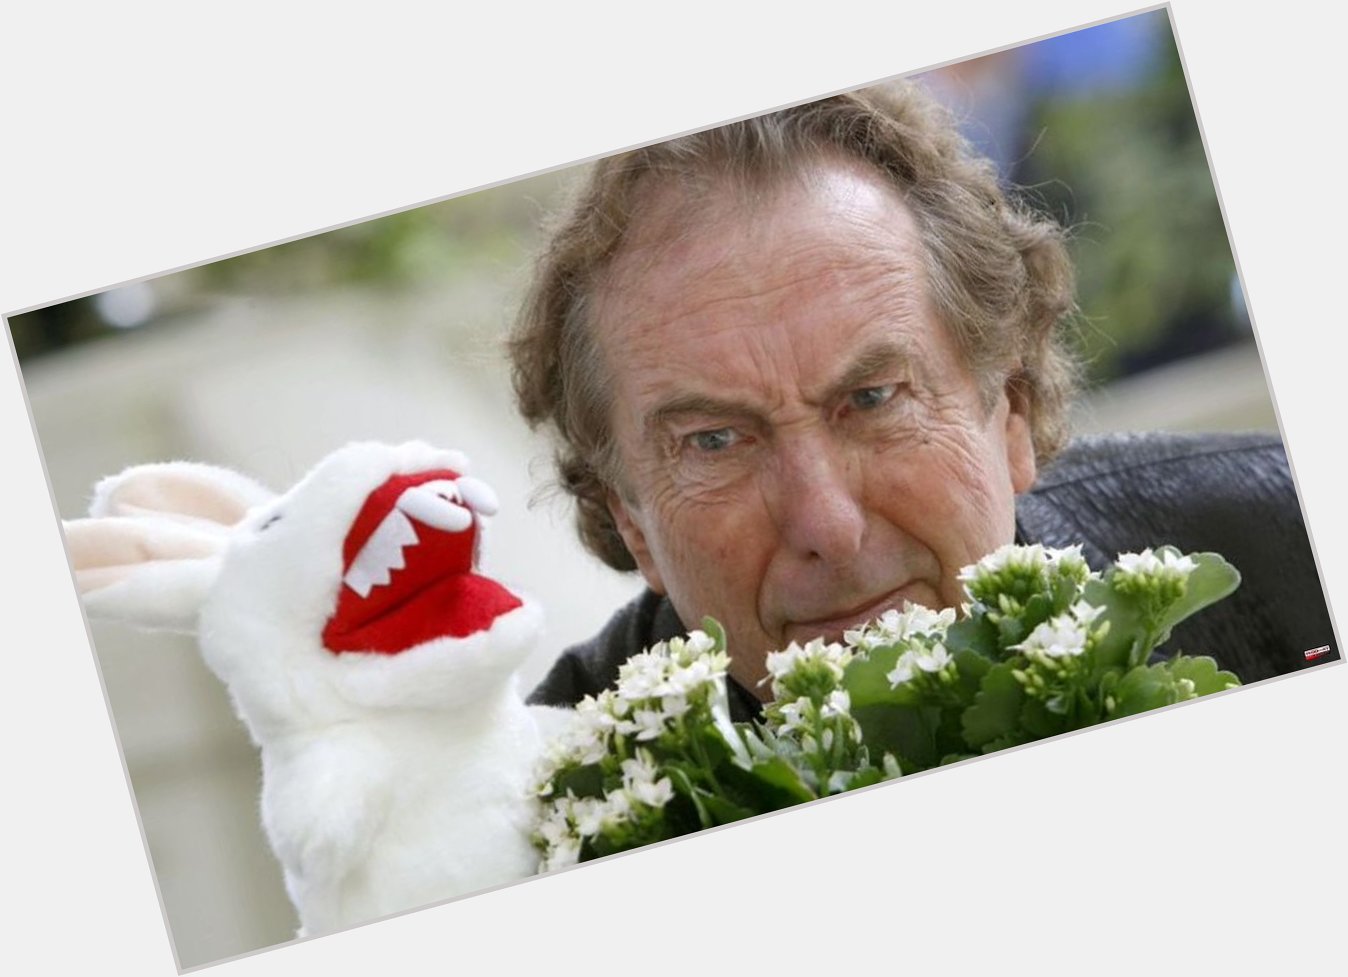 Happy 80th Birthday to Mr Eric Idle.
And Happy Easter to the harmless little bunny. 